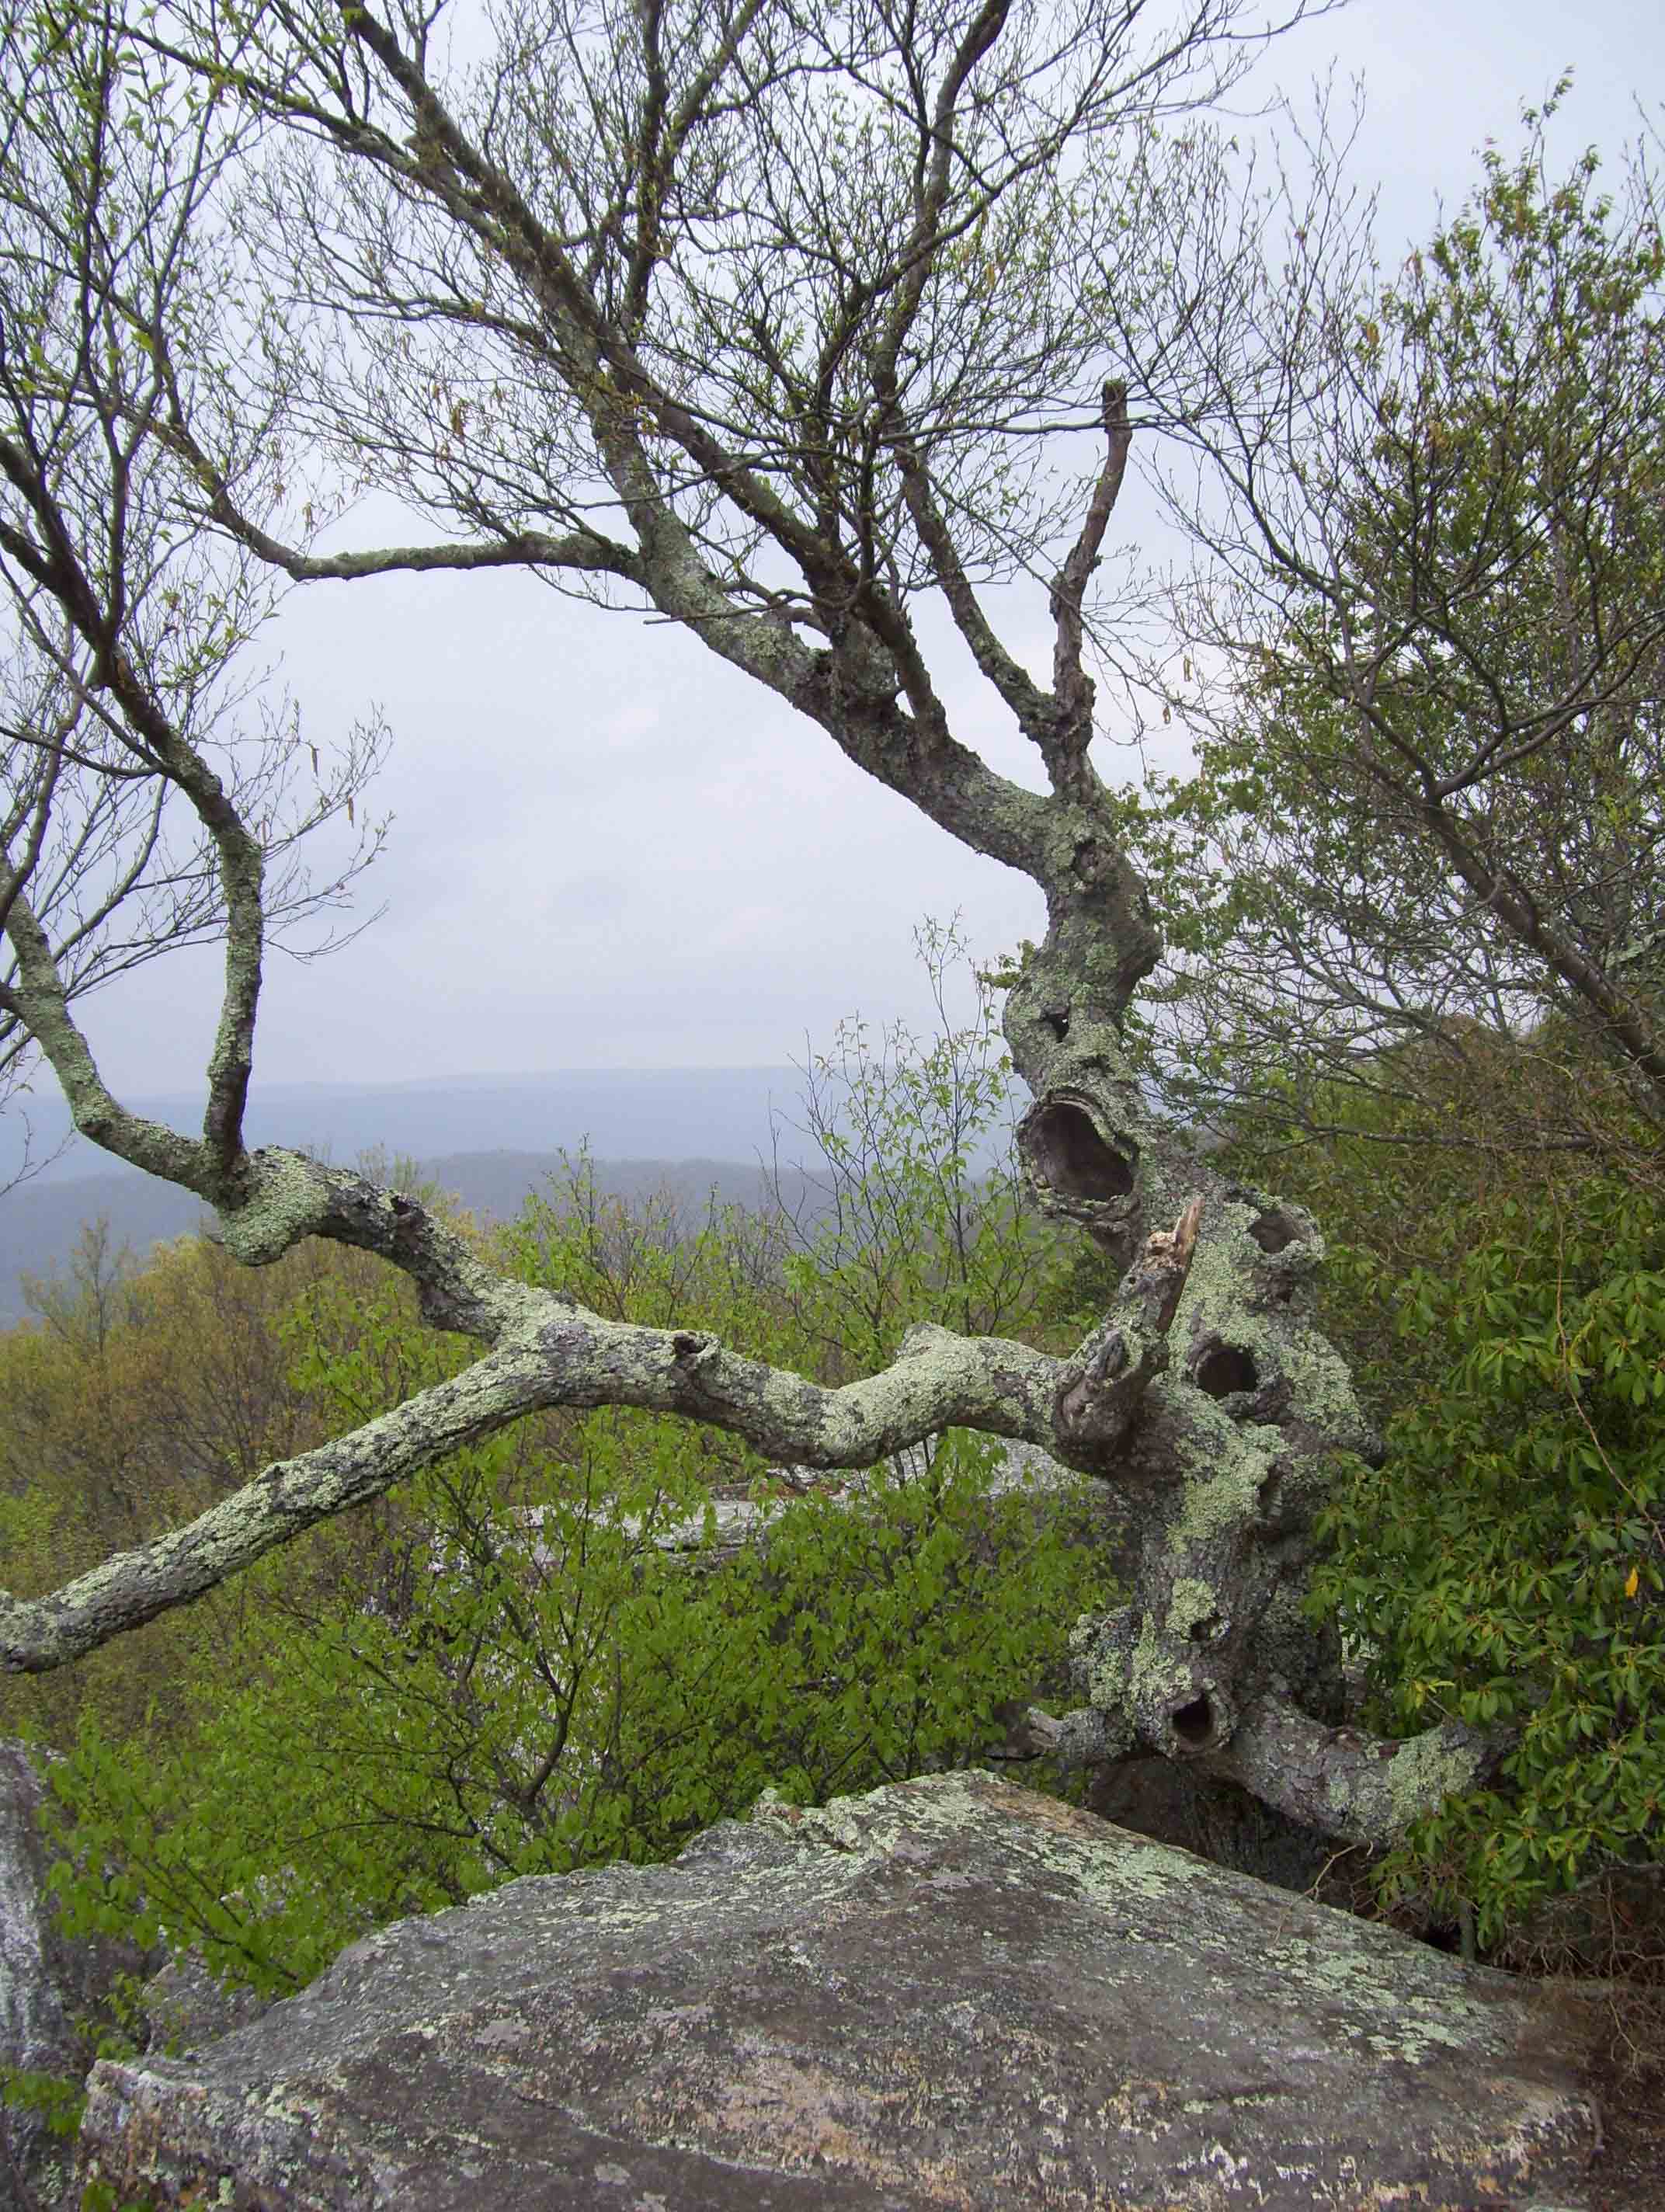 MM 3.6 - Gnarled old tree at White Rock Viewpoint.  Courtesy dlcul@conncoll.edu